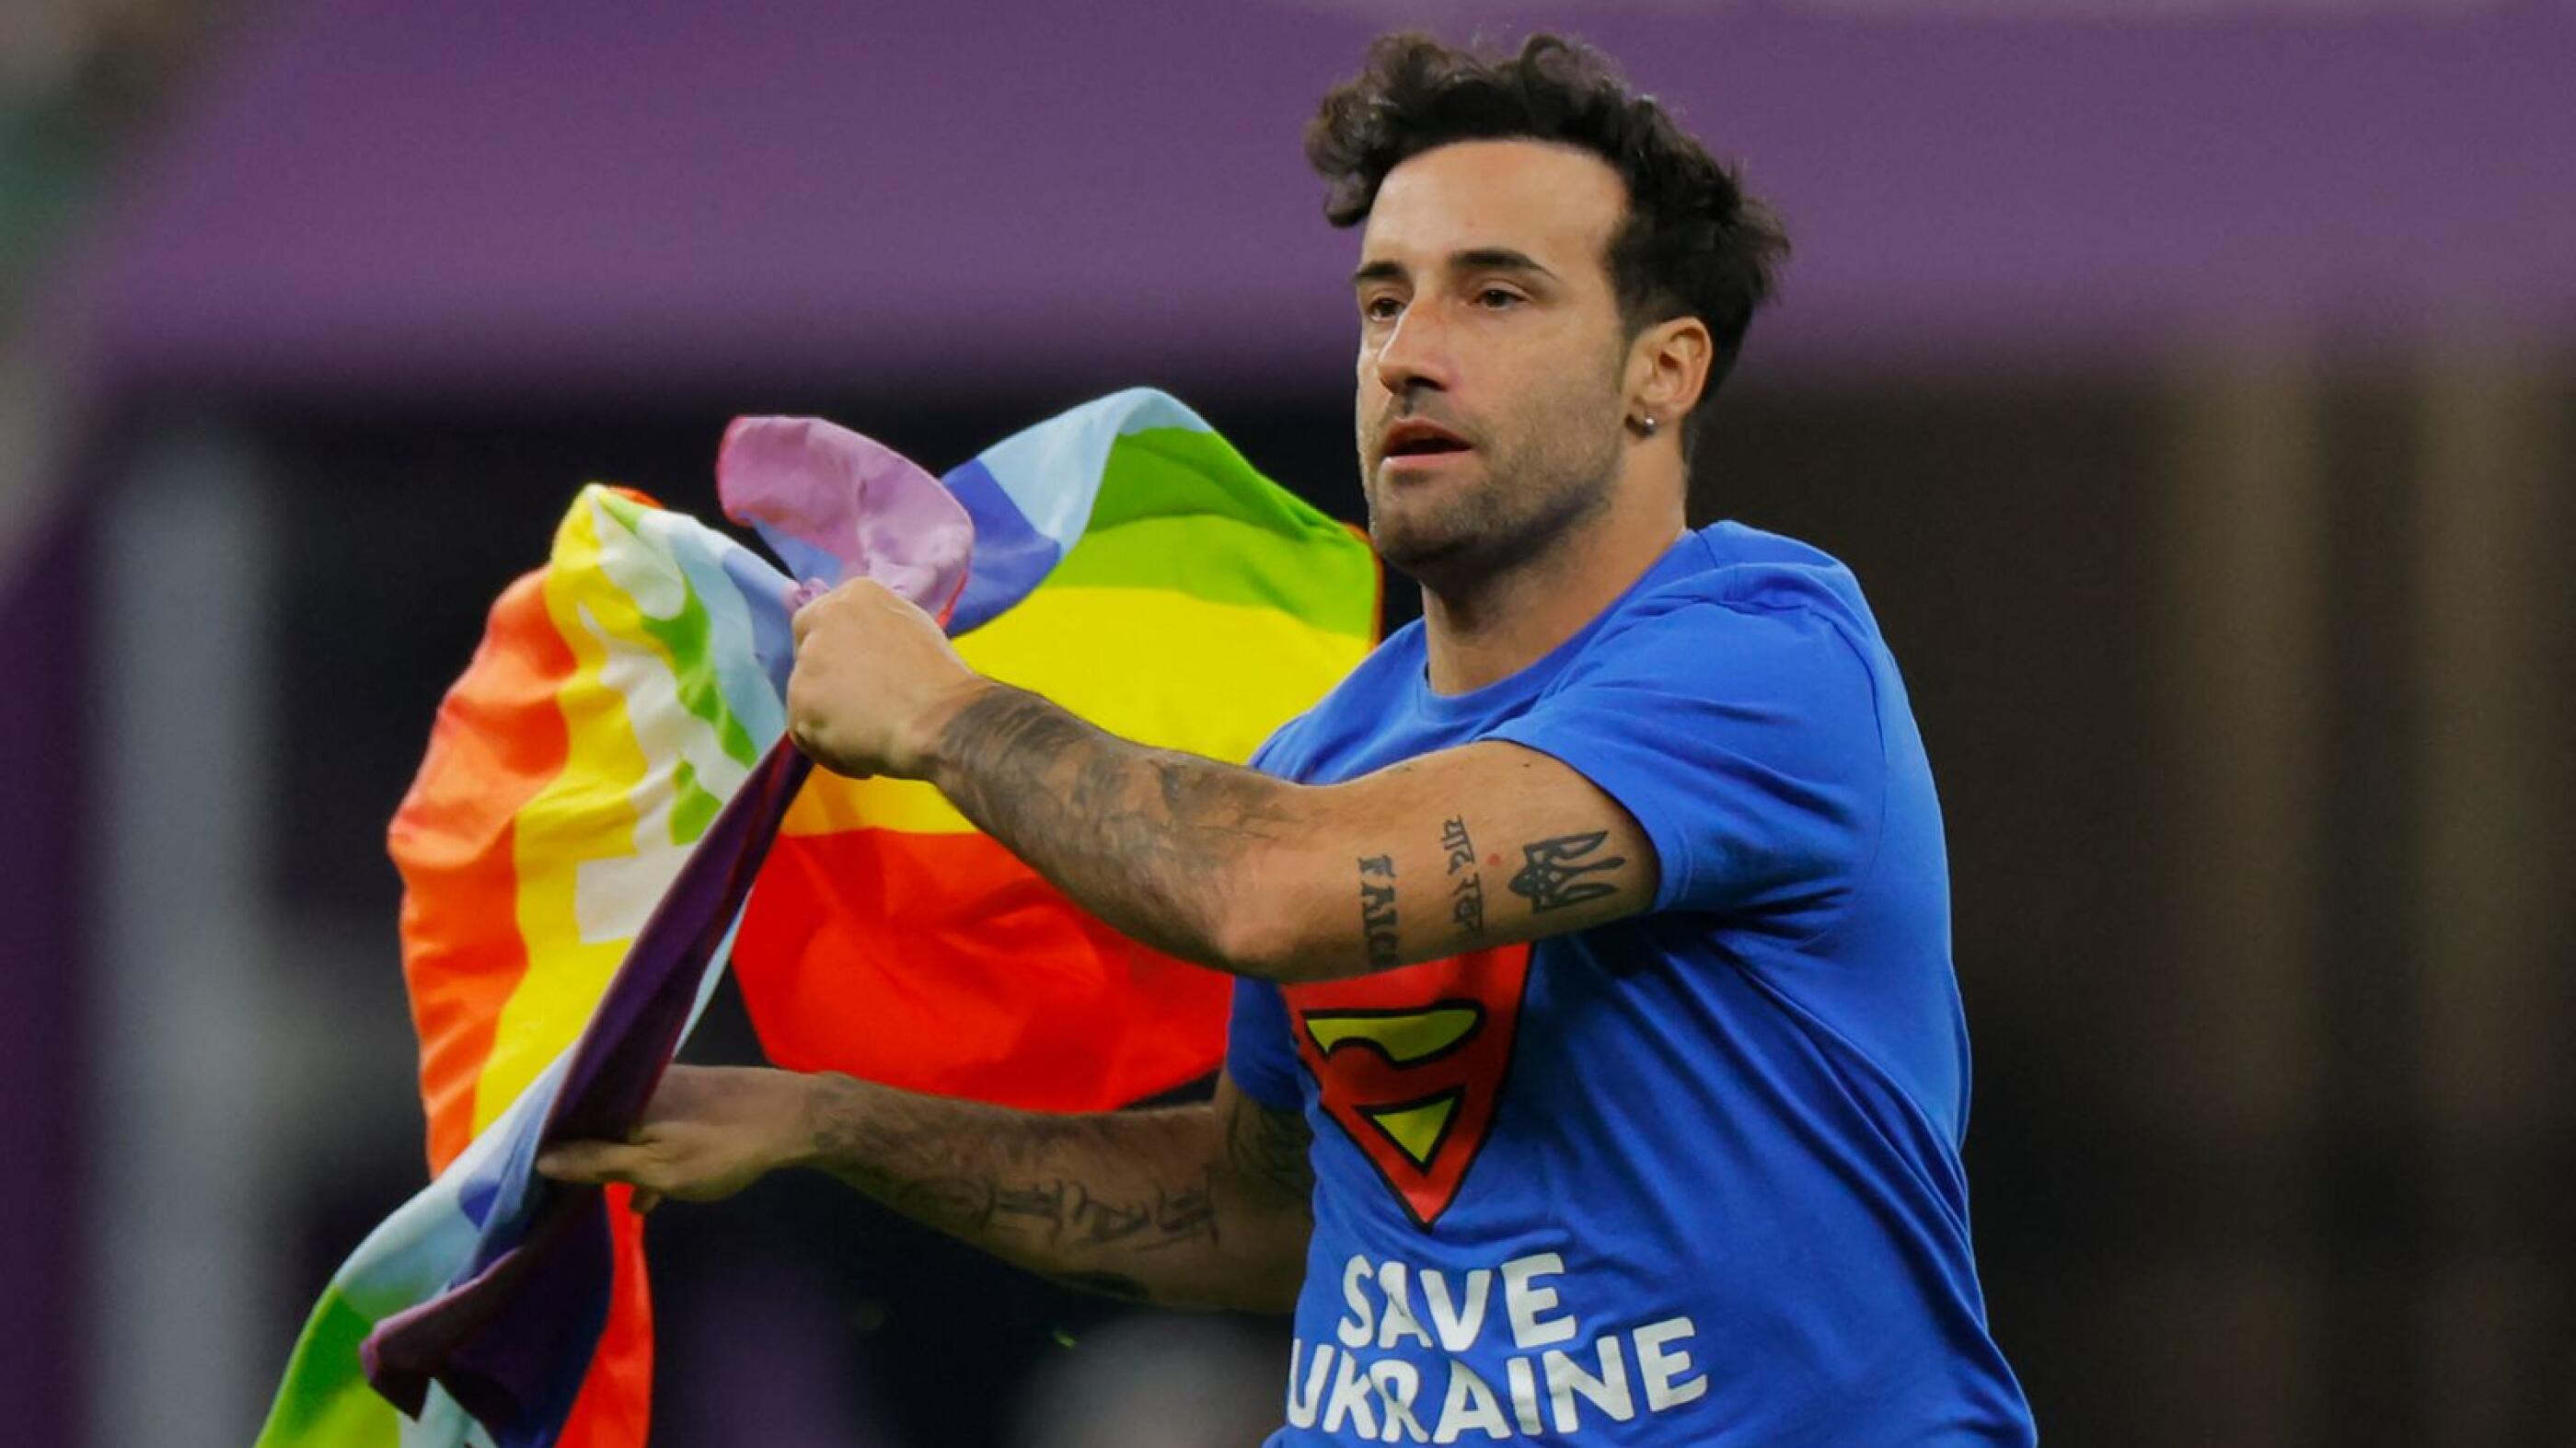 A man wearing a t-shirt reading ‘Save Ukraine’ runs on the pitch waving a rainbow flag on the pitch during the Qatar 2022 World Cup Group H football match between Portugal and Uruguay at the Lusail Stadium in Lusail on Monday